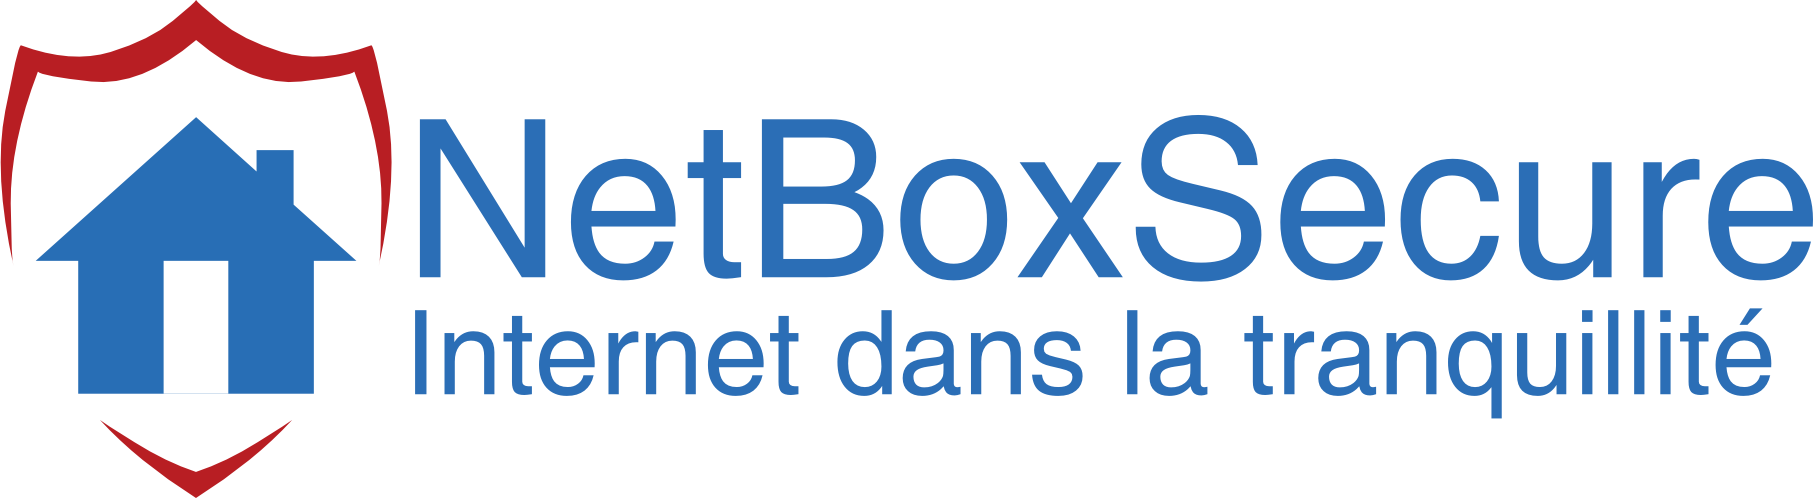 NetBoxSecure